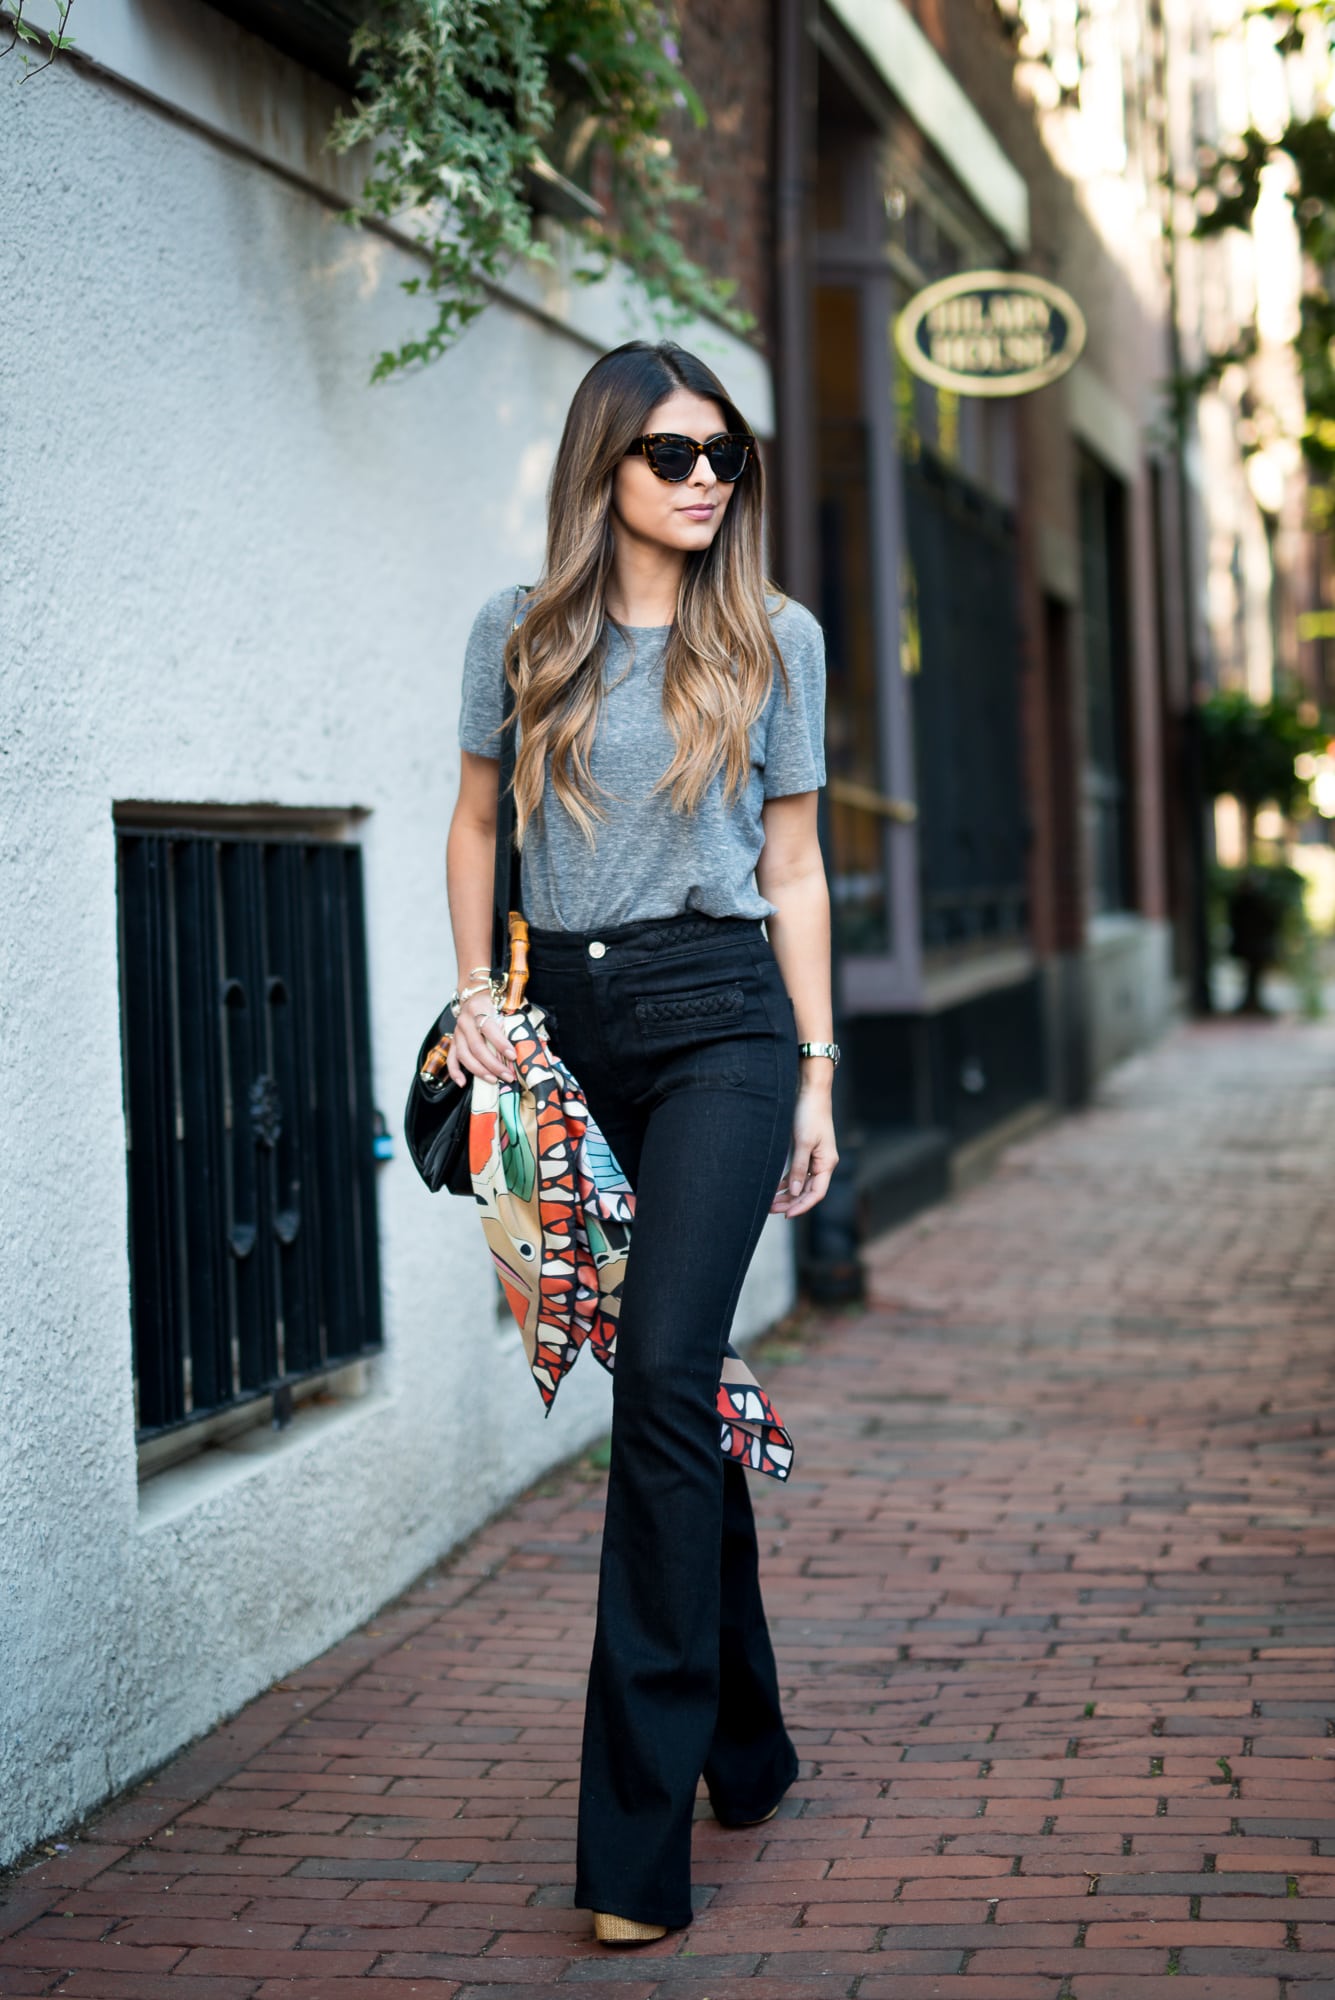 Pam Hetlinger wearing a Chicory Silk Scarf - 7 For All Mankind Braided BRAIDED HIGH WAIST FLARE IN TRUE BLACK - Schutz Amatista - Forever 21 Grey Tee - Pam Hetlinger - The Girl From Panama